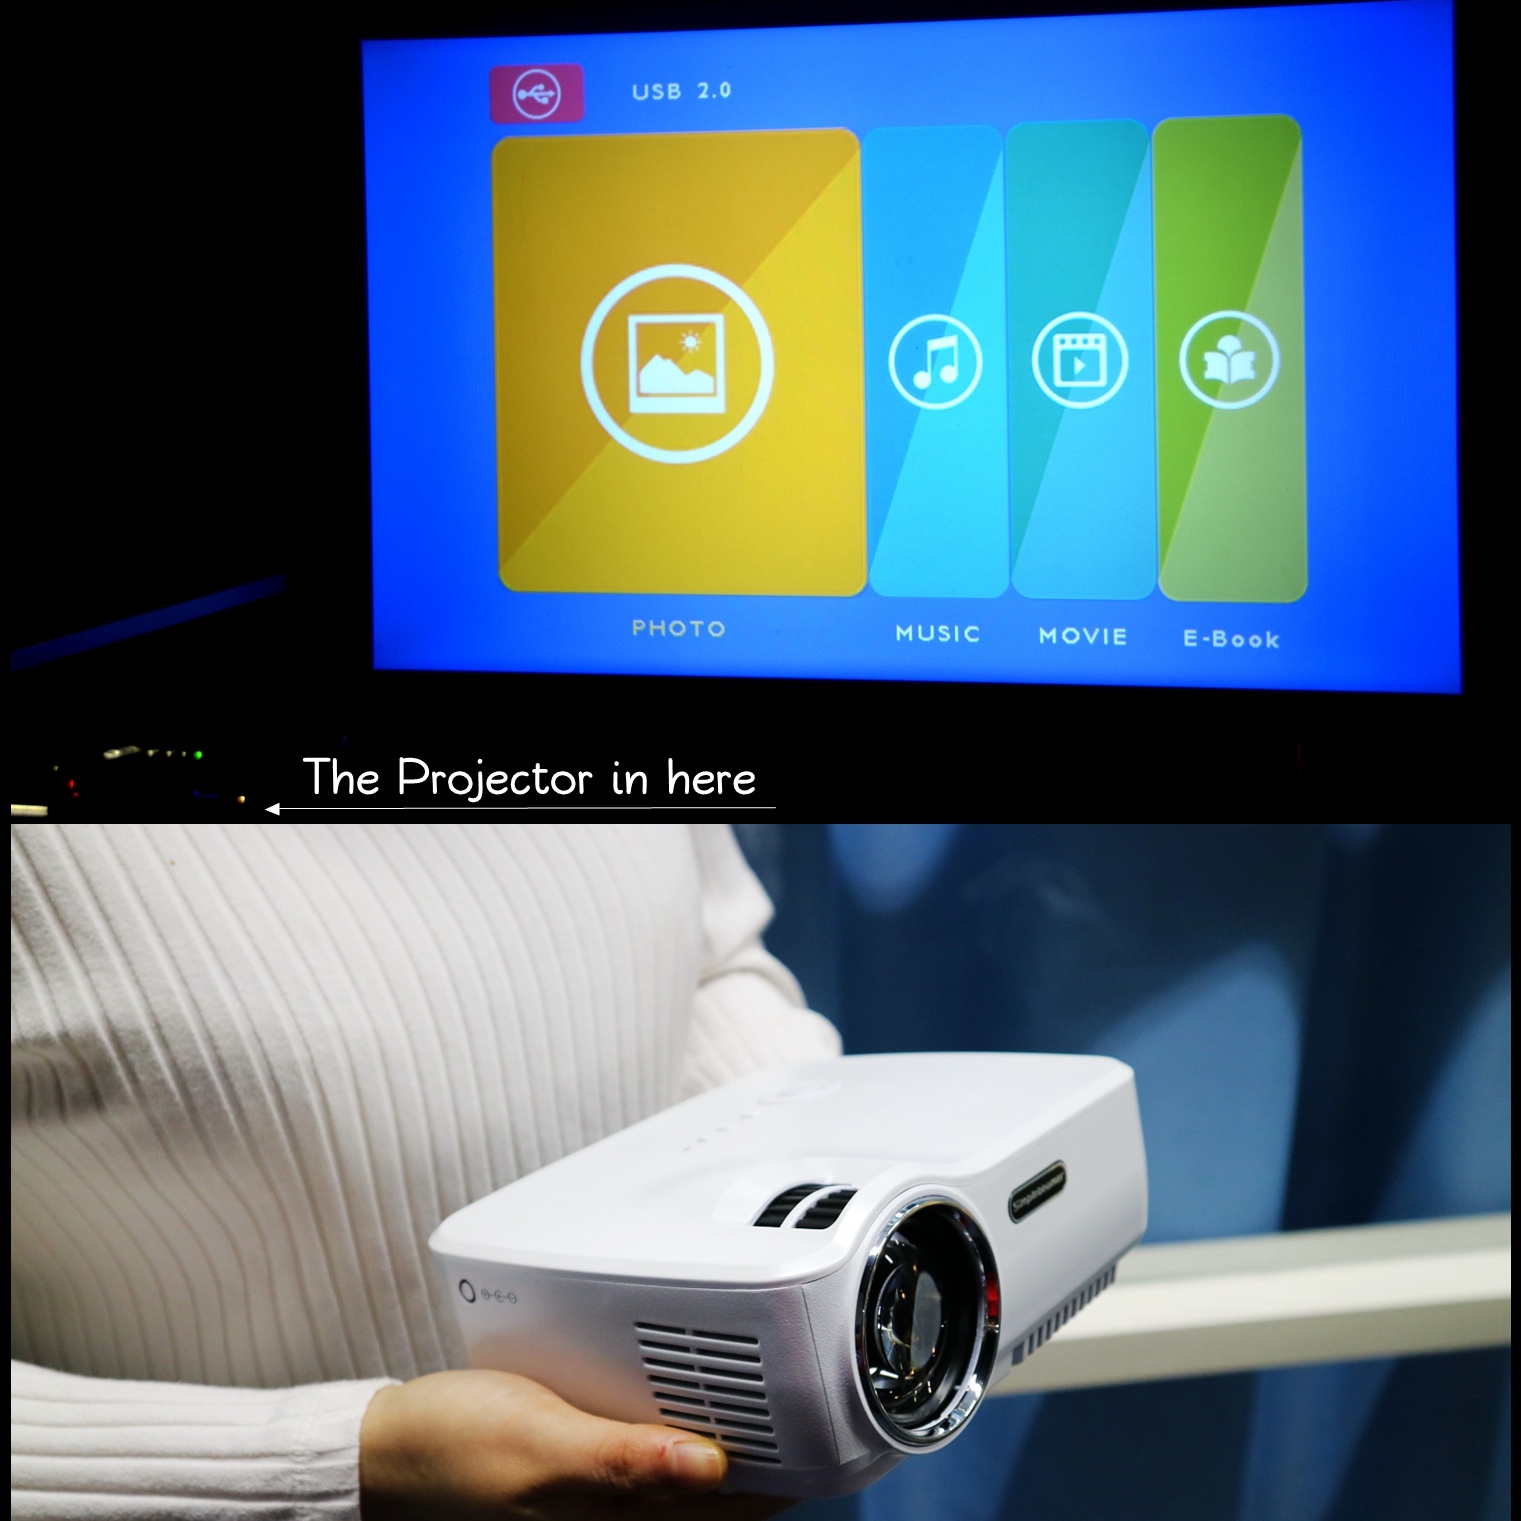 Mini Portable Video LED Projector 1080P for Outdoor Indoor Home Cinema Theater/Game/DVD/PC/Laptop Show 